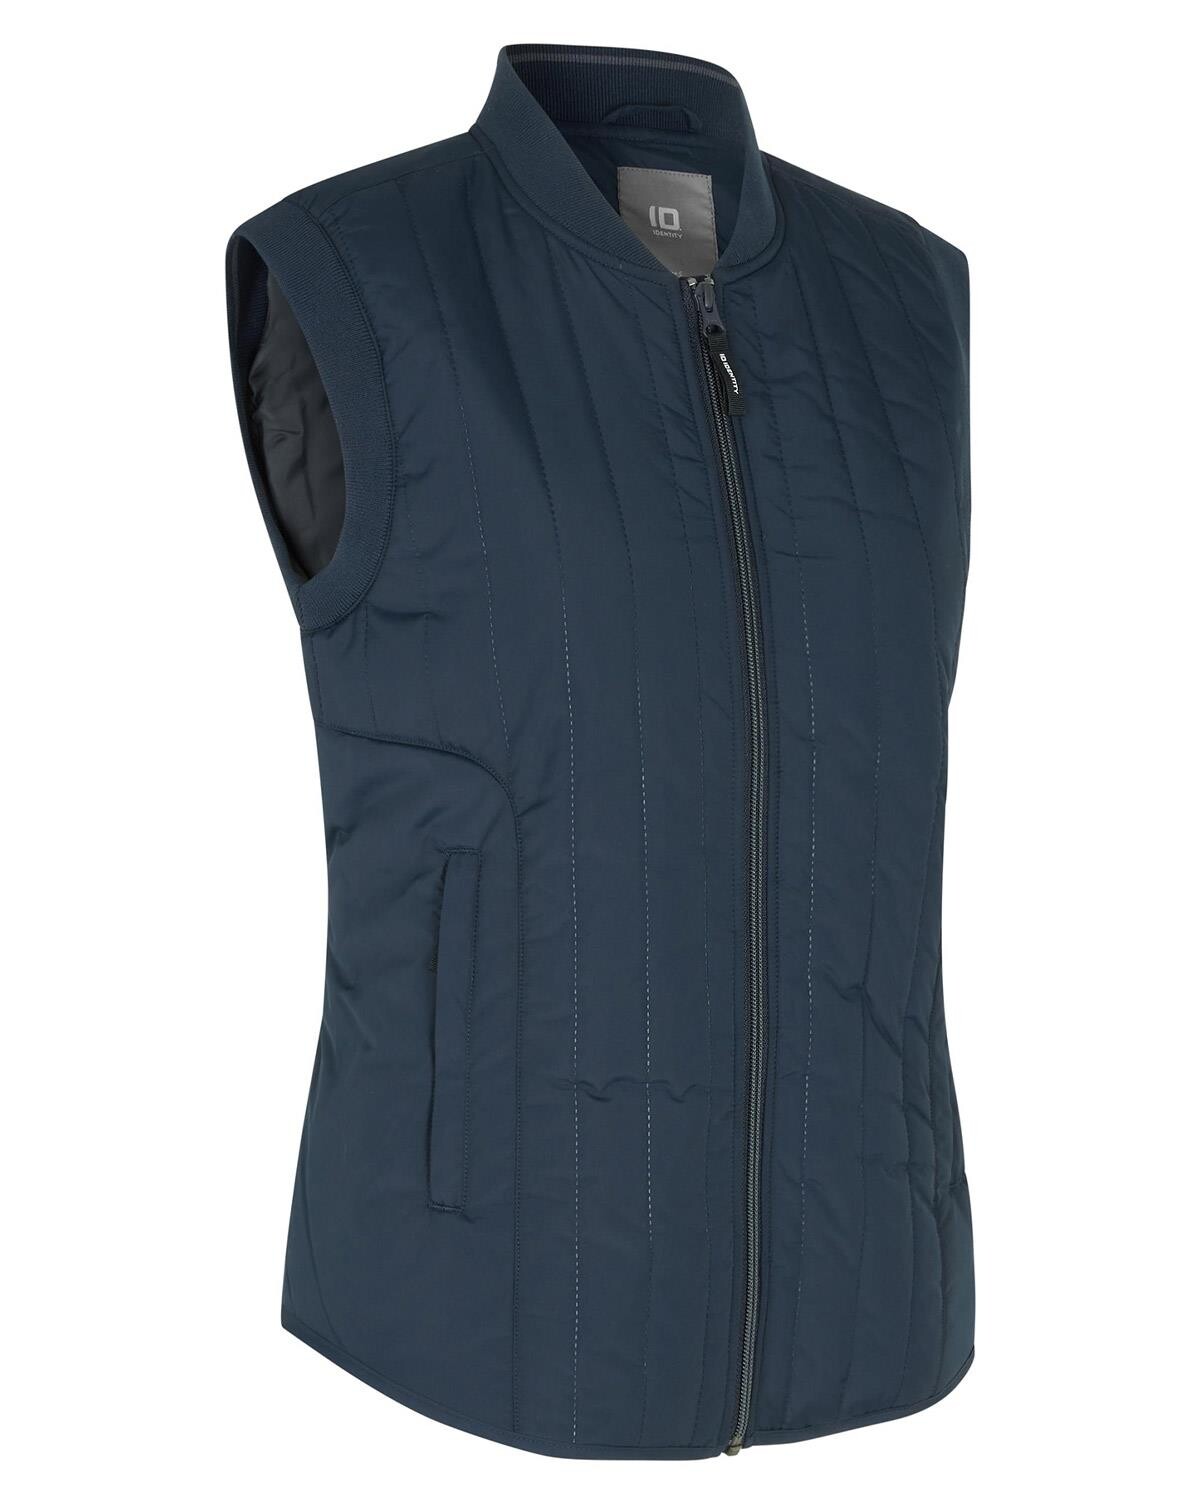 ID Core Termovest Dame (Navy, XL)